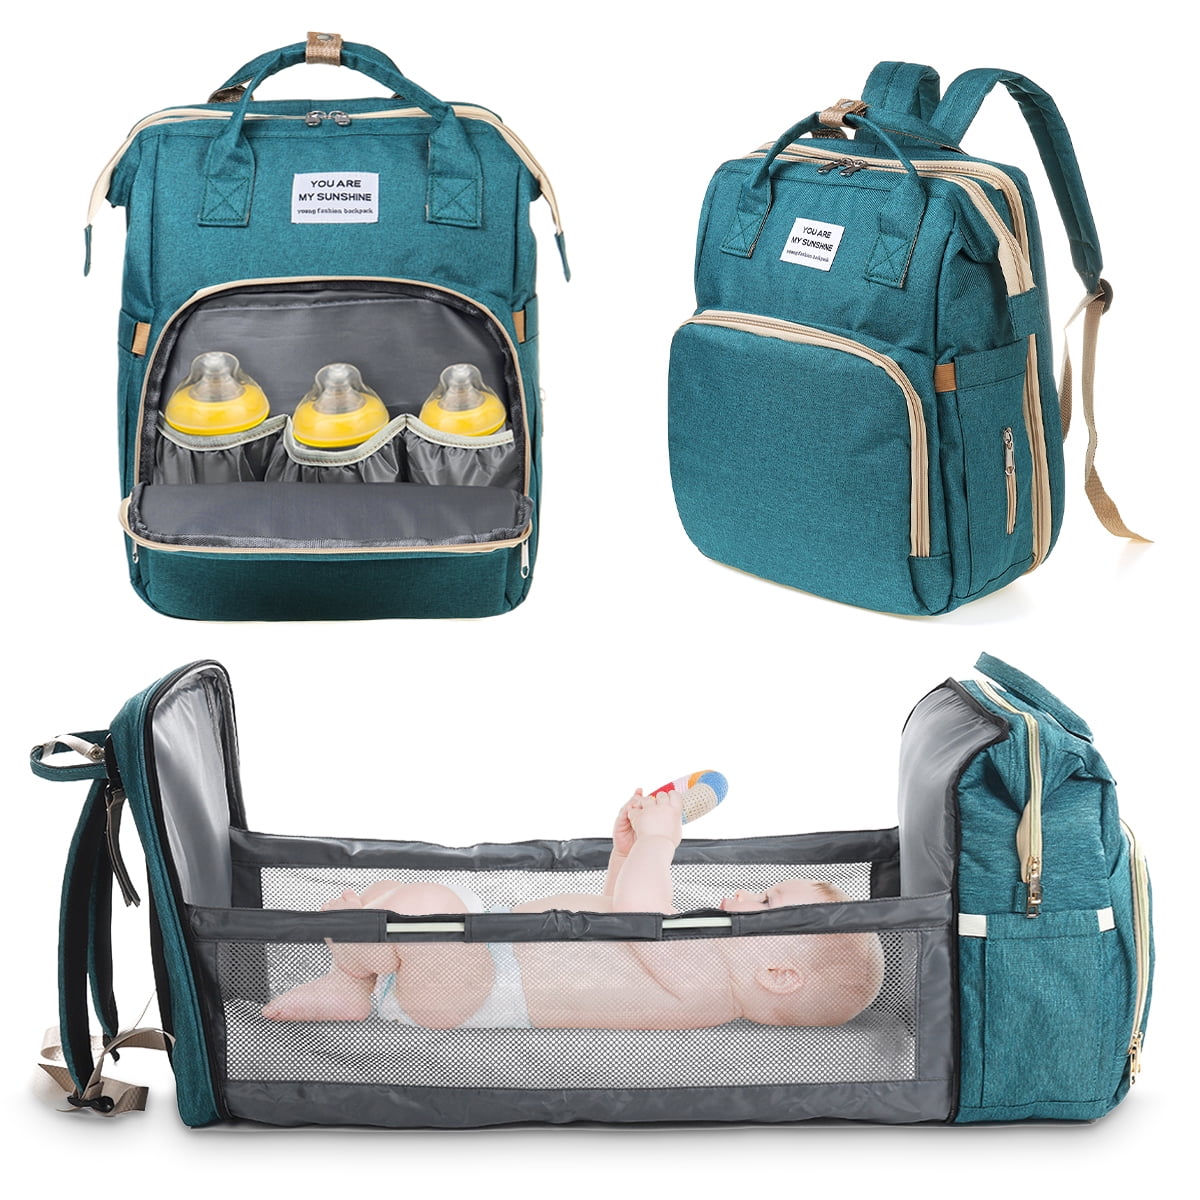 Nappies Large Diaper Bag with Portable Mat Clothes Maternity Hospital Rucksack Multi-Compartment Design for Bottles Perfect Gift for New Mums Black SA Products Baby Nappy Changing Backpack